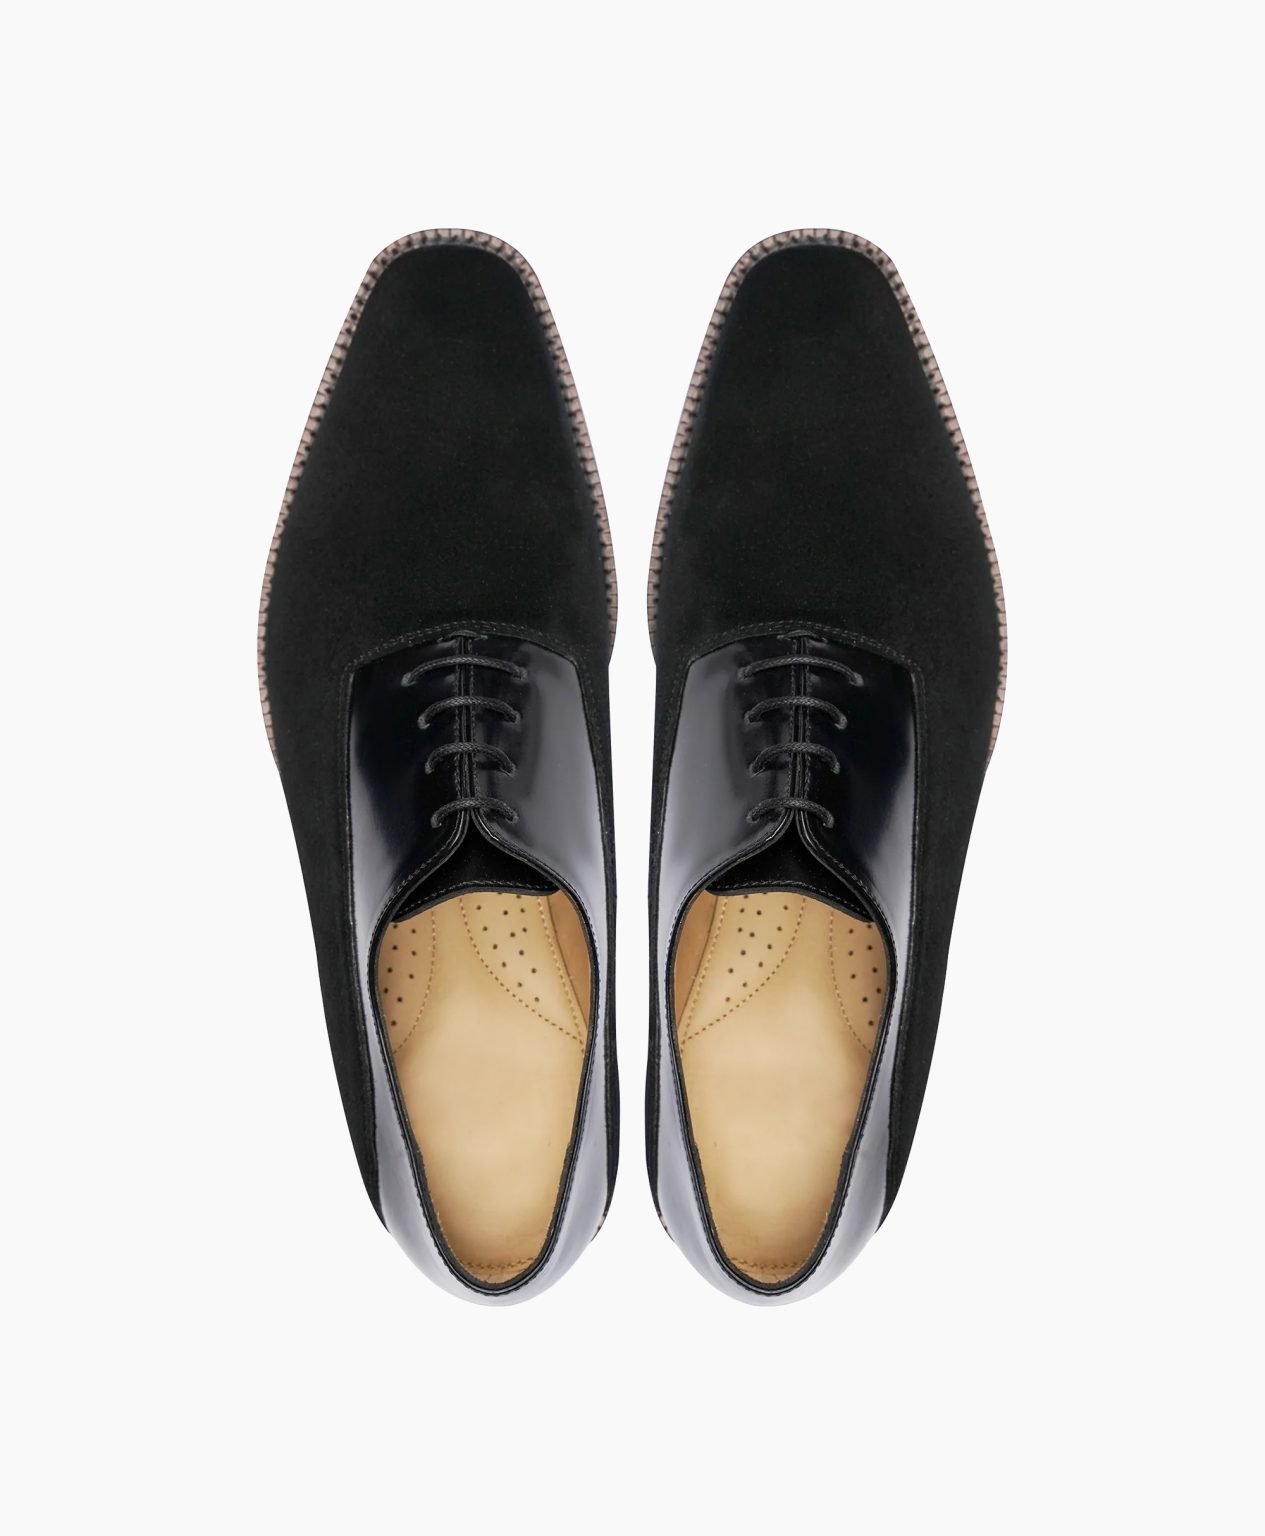 nantwich-oxford-fusion-of-black-suede-leather-shoes-image202